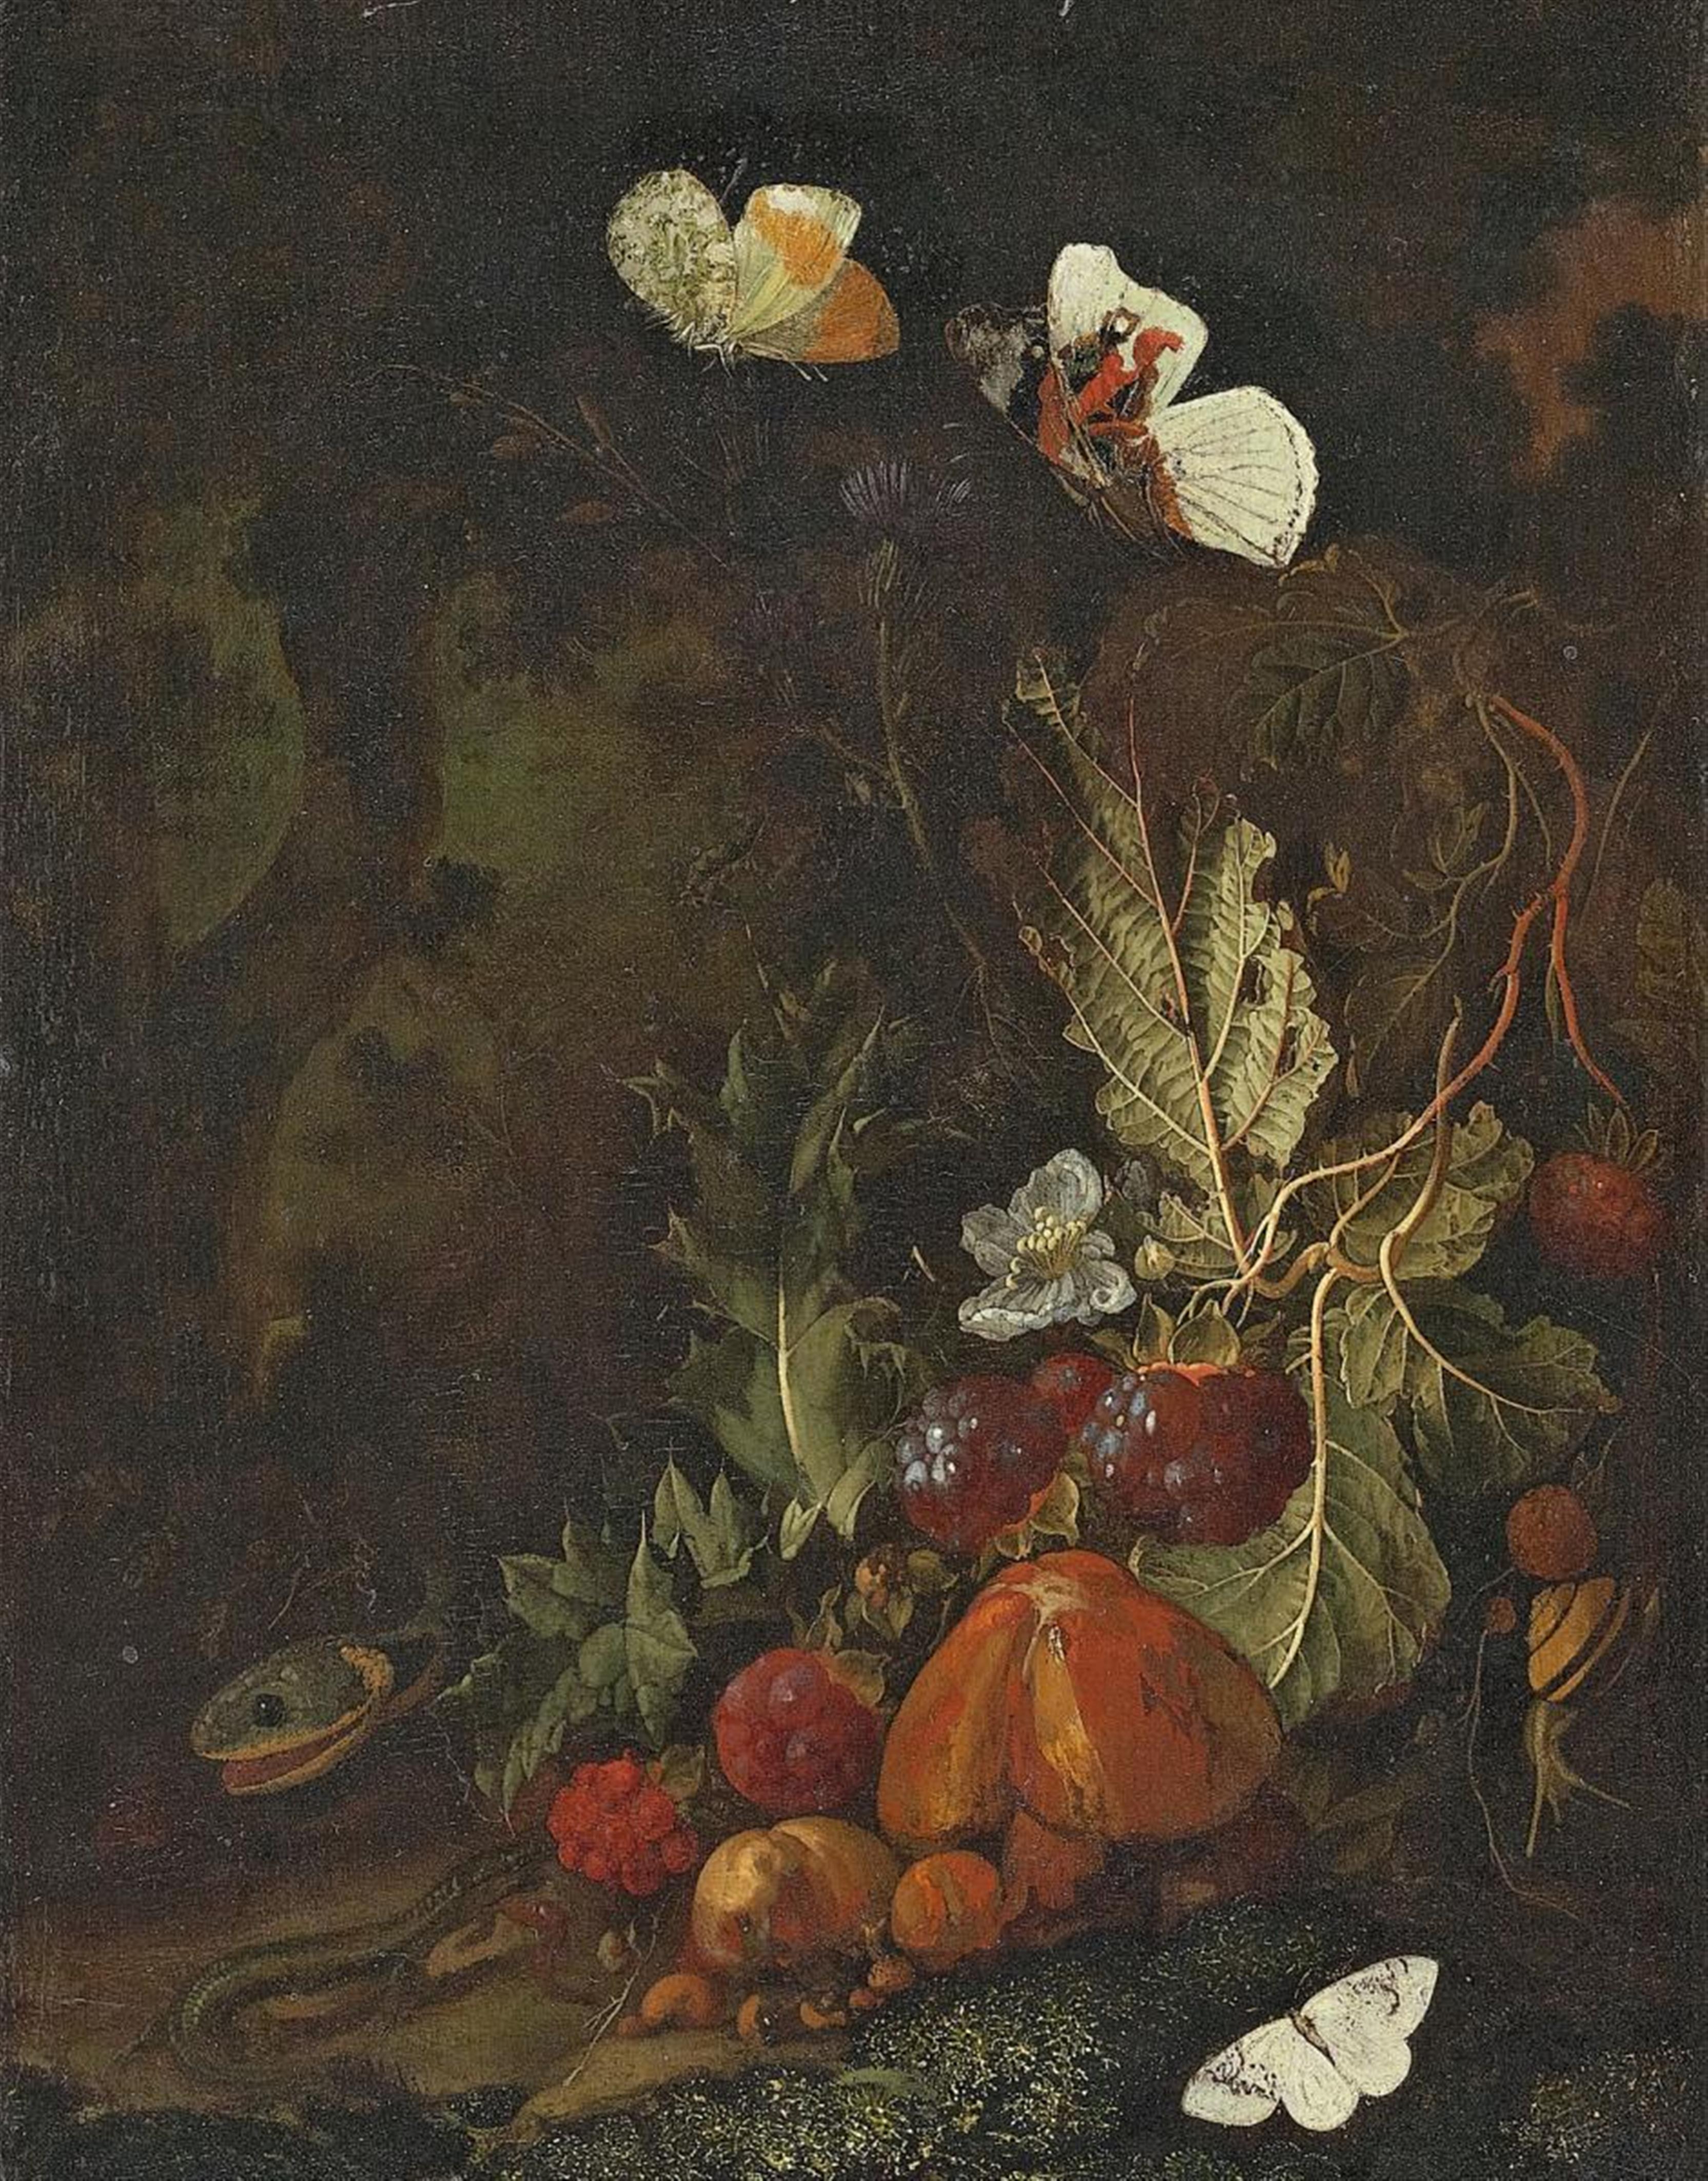 Carl Wilhelm de Hamilton, attributed to - STILL LIFE WITH FRUITS, BUTTERFLIES AND SNAKE - image-1